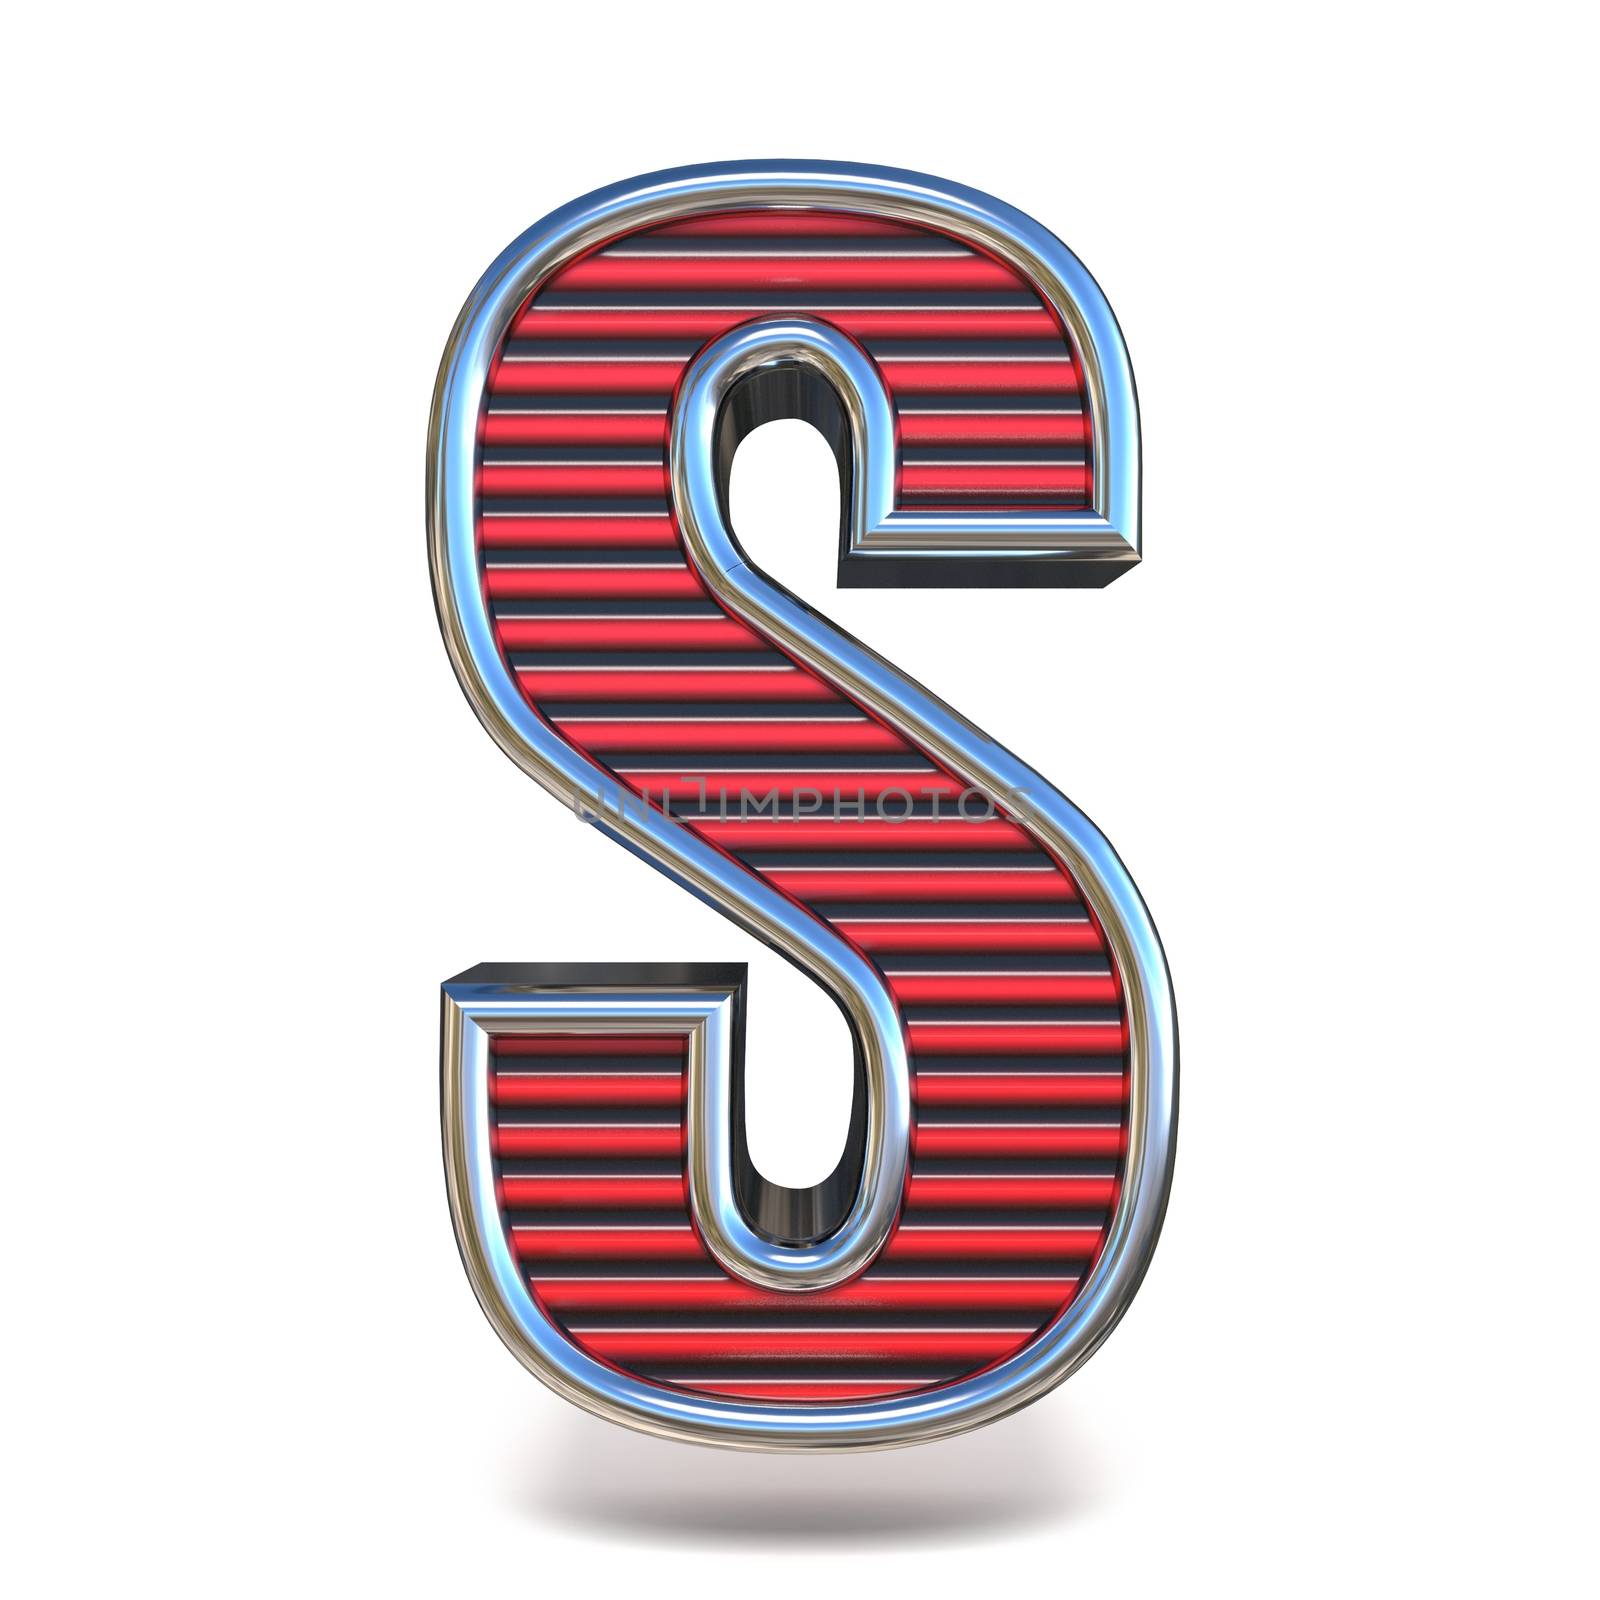 Metal red lines font Letter S 3D render illustration isolated on white background